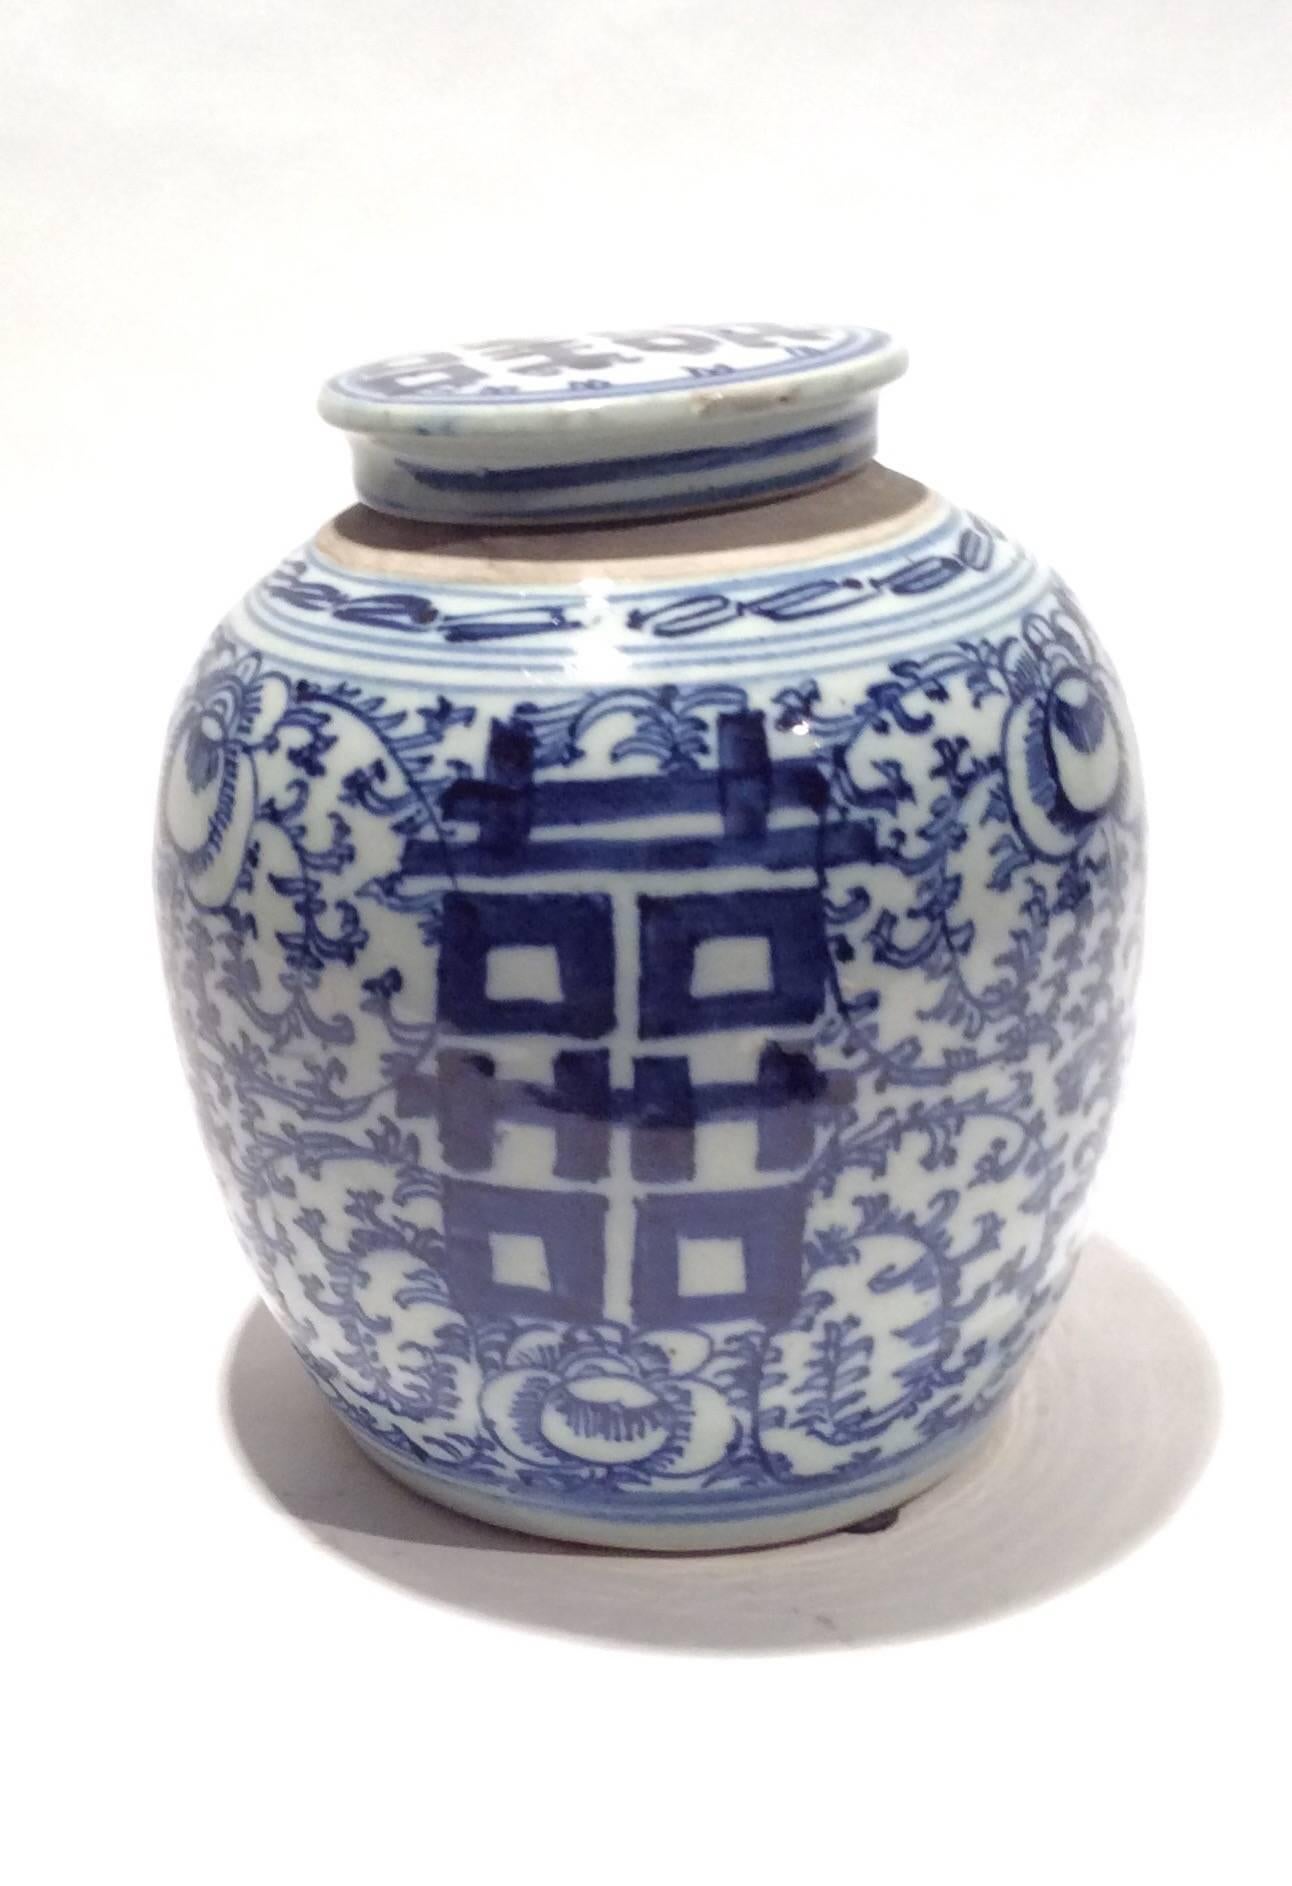 From a private collection, and purchased in Hong Kong in the 1970s this ginger jar is approximately 100 years old.